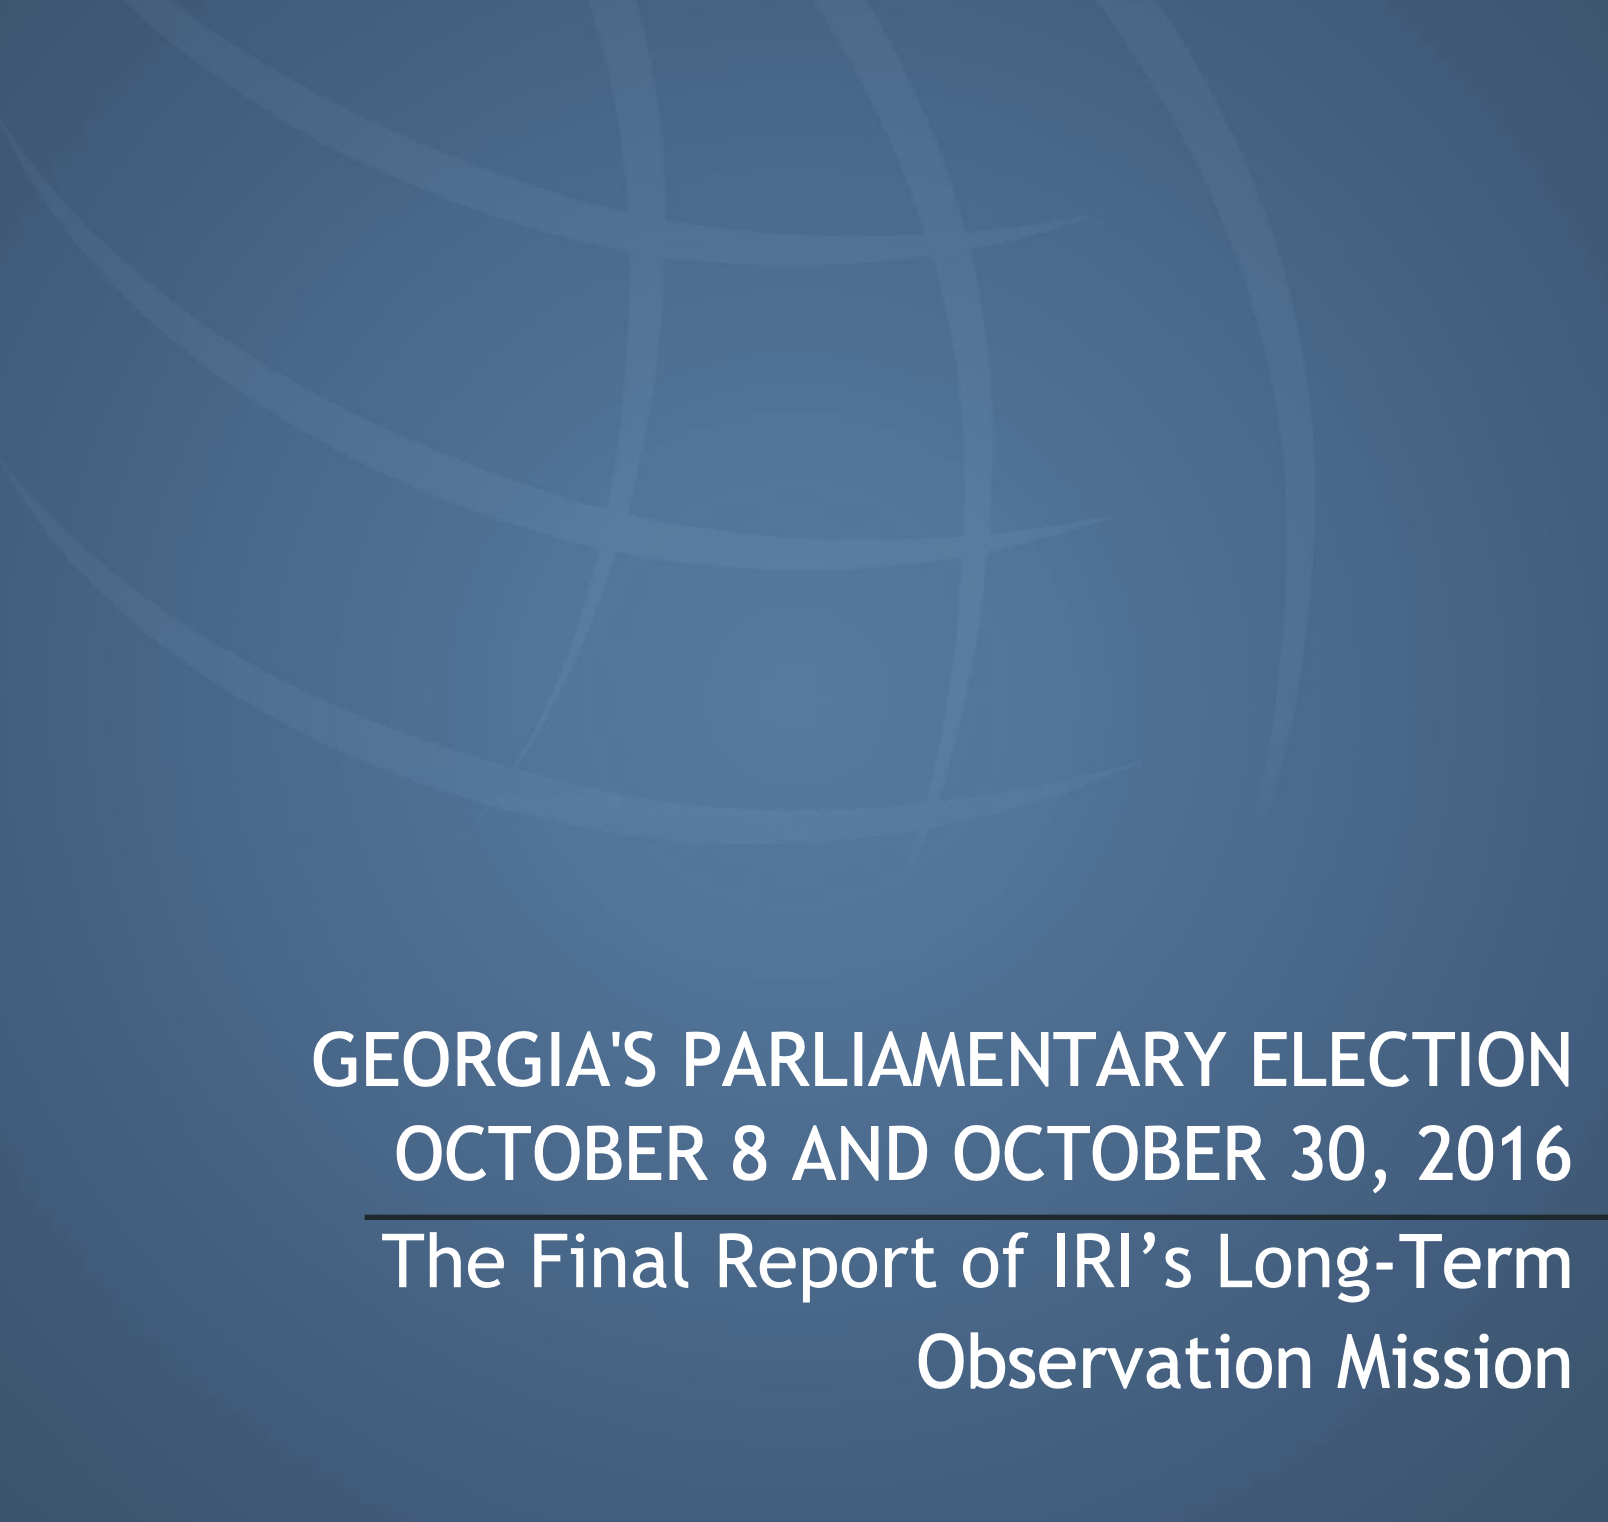 GEORGIA'S PARLIAMENTARY ELECTION OCTOBER 8 AND OCTOBER 30, 2016 The Final Report of IRI’s Long-Term Observation Mission